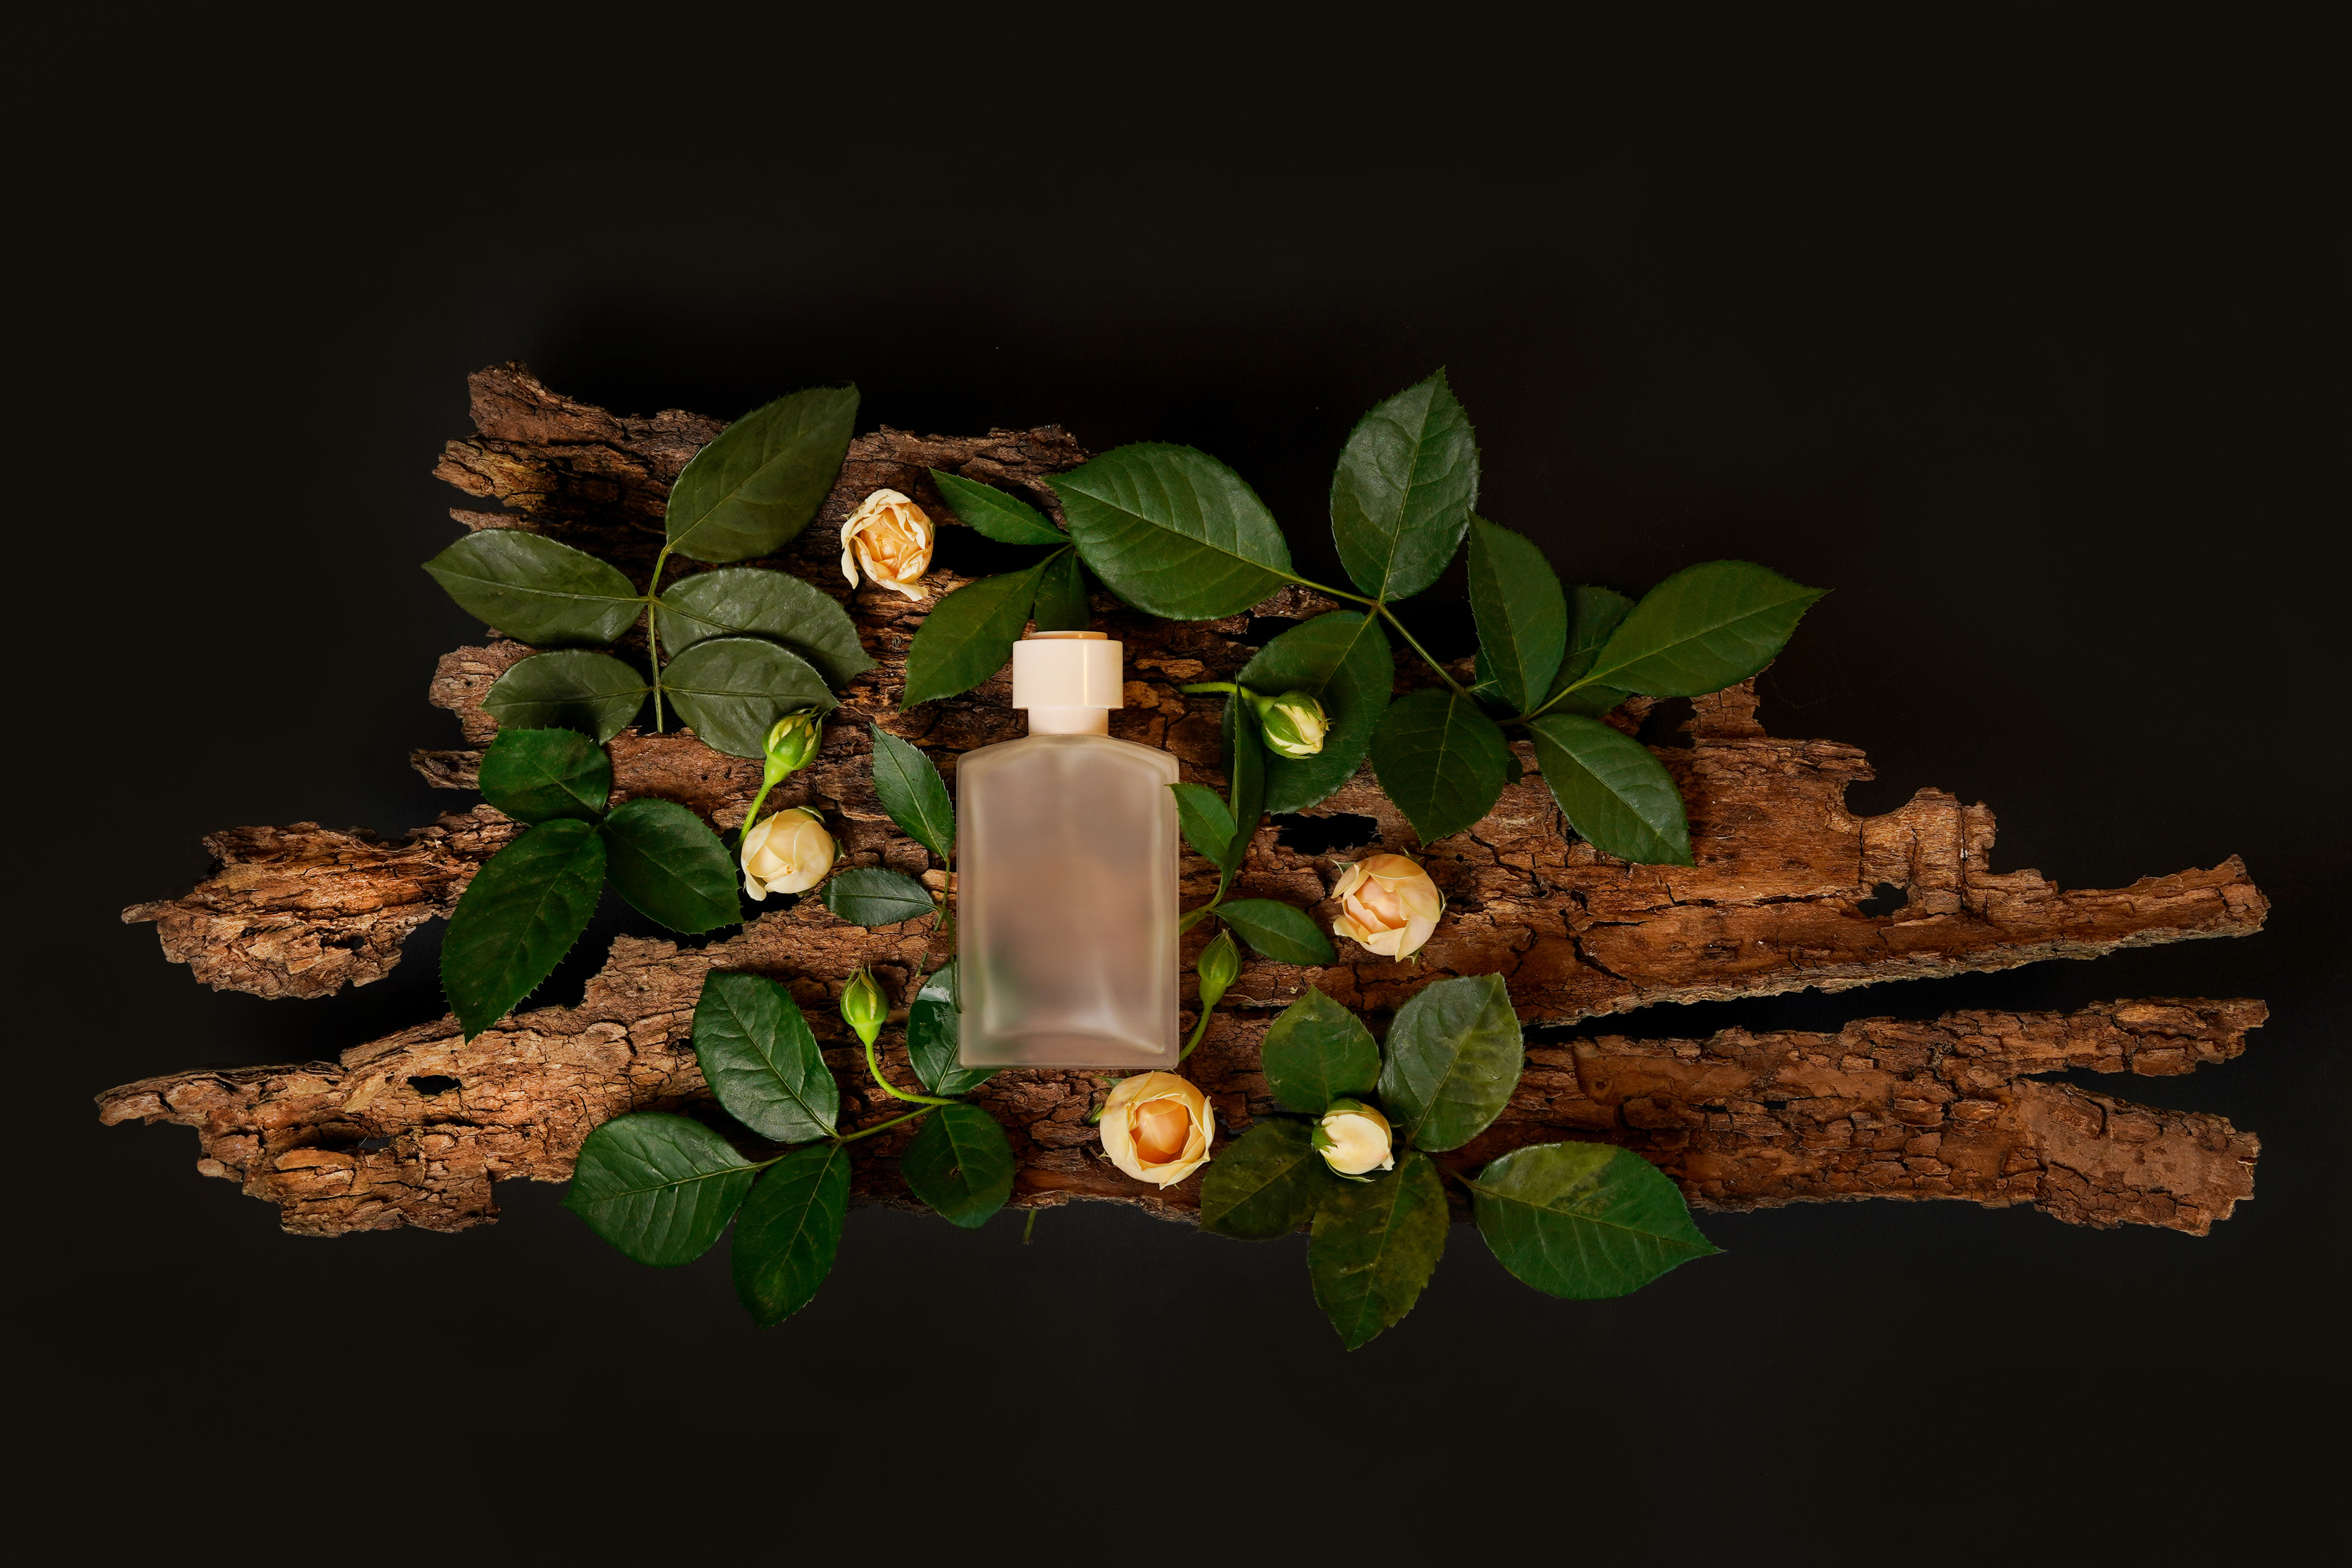 Natural perfume glass bottle on wood with flowers and green leaves on black background